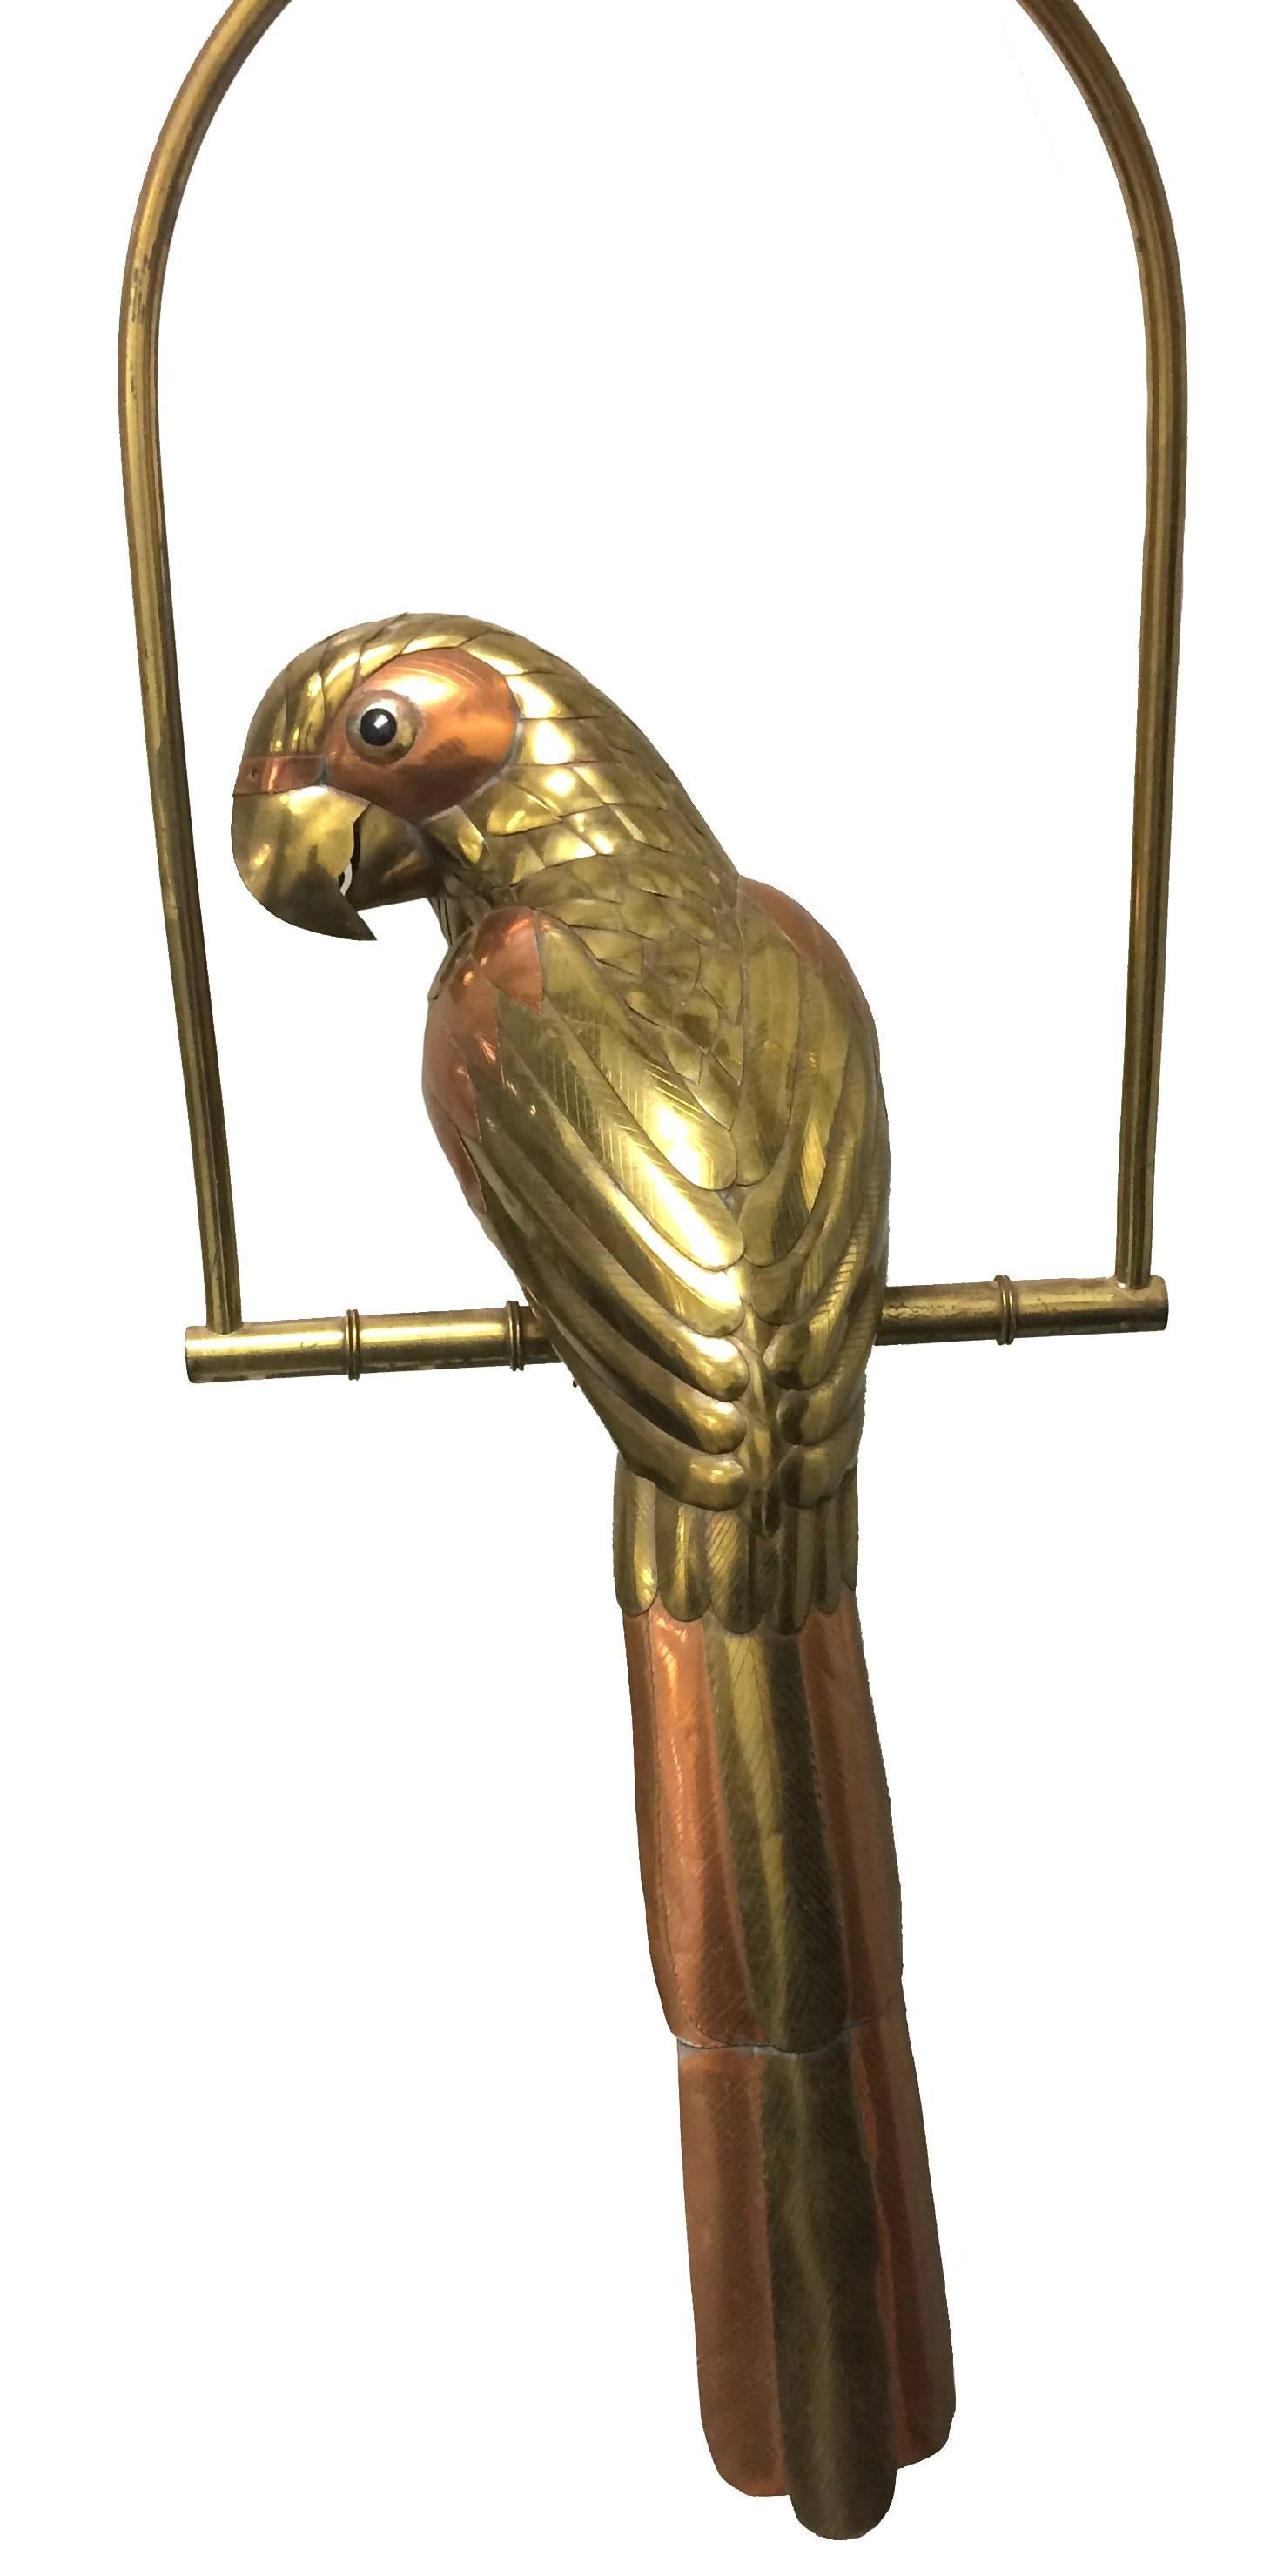 1970s hanging brass and copper metal parrot by Sergio Bustamante. Brass stand with bamboo style accents. Unsigned. Stand is 14